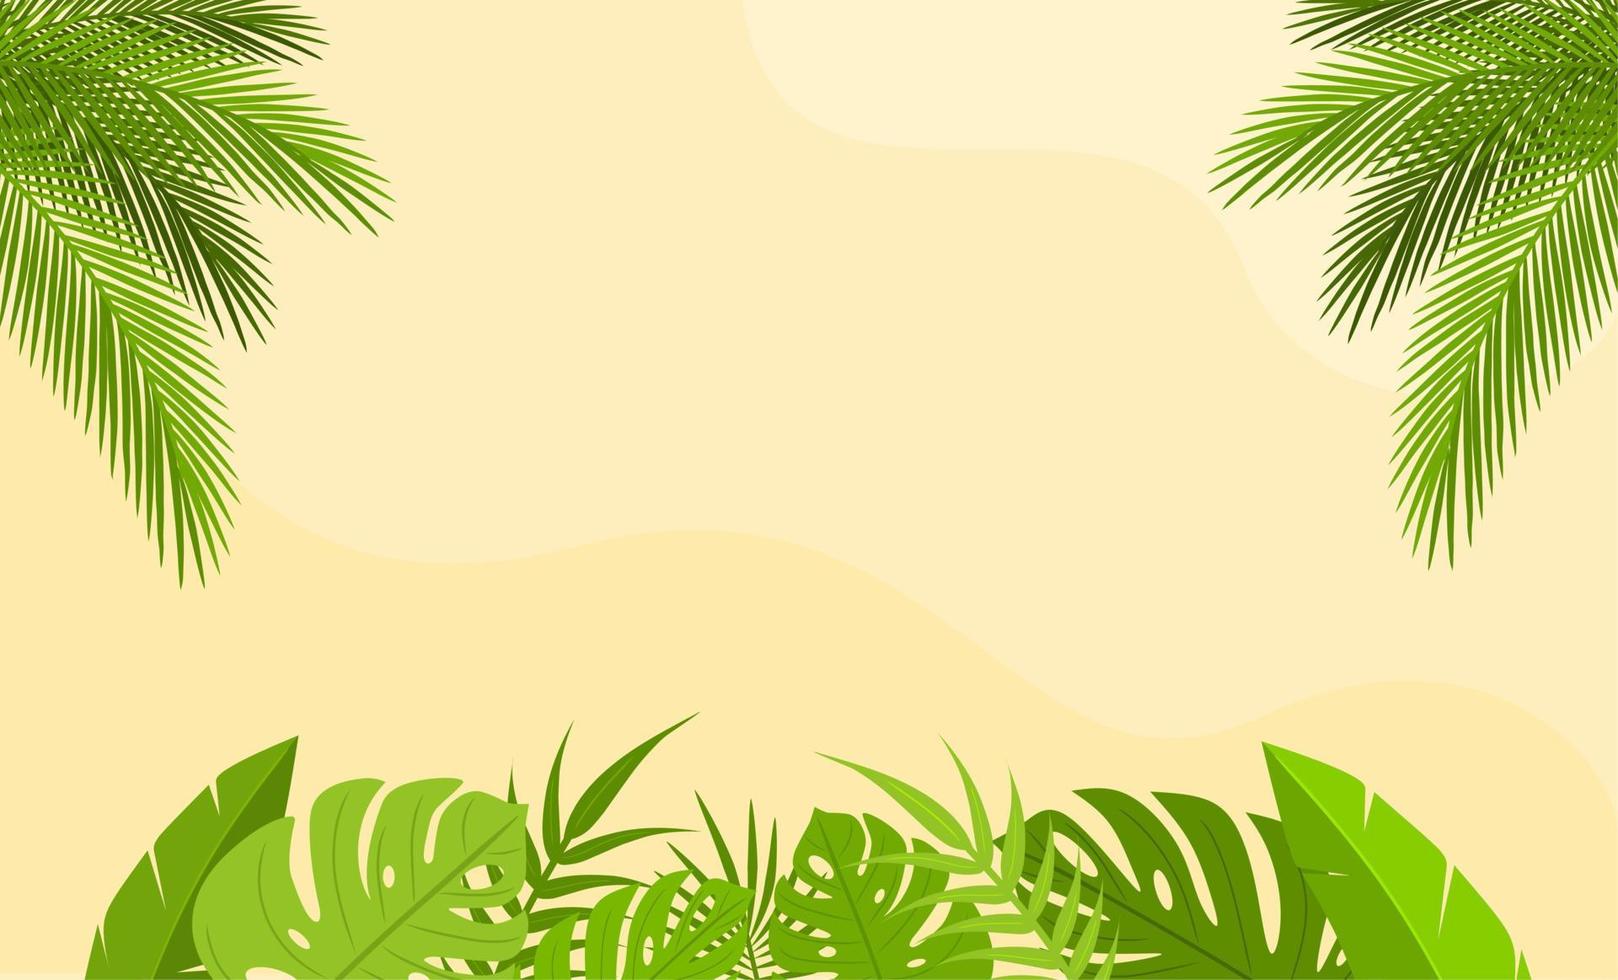 Tropical leaves background vector design. Summer leaves flat illustration. Simple banner with copy space